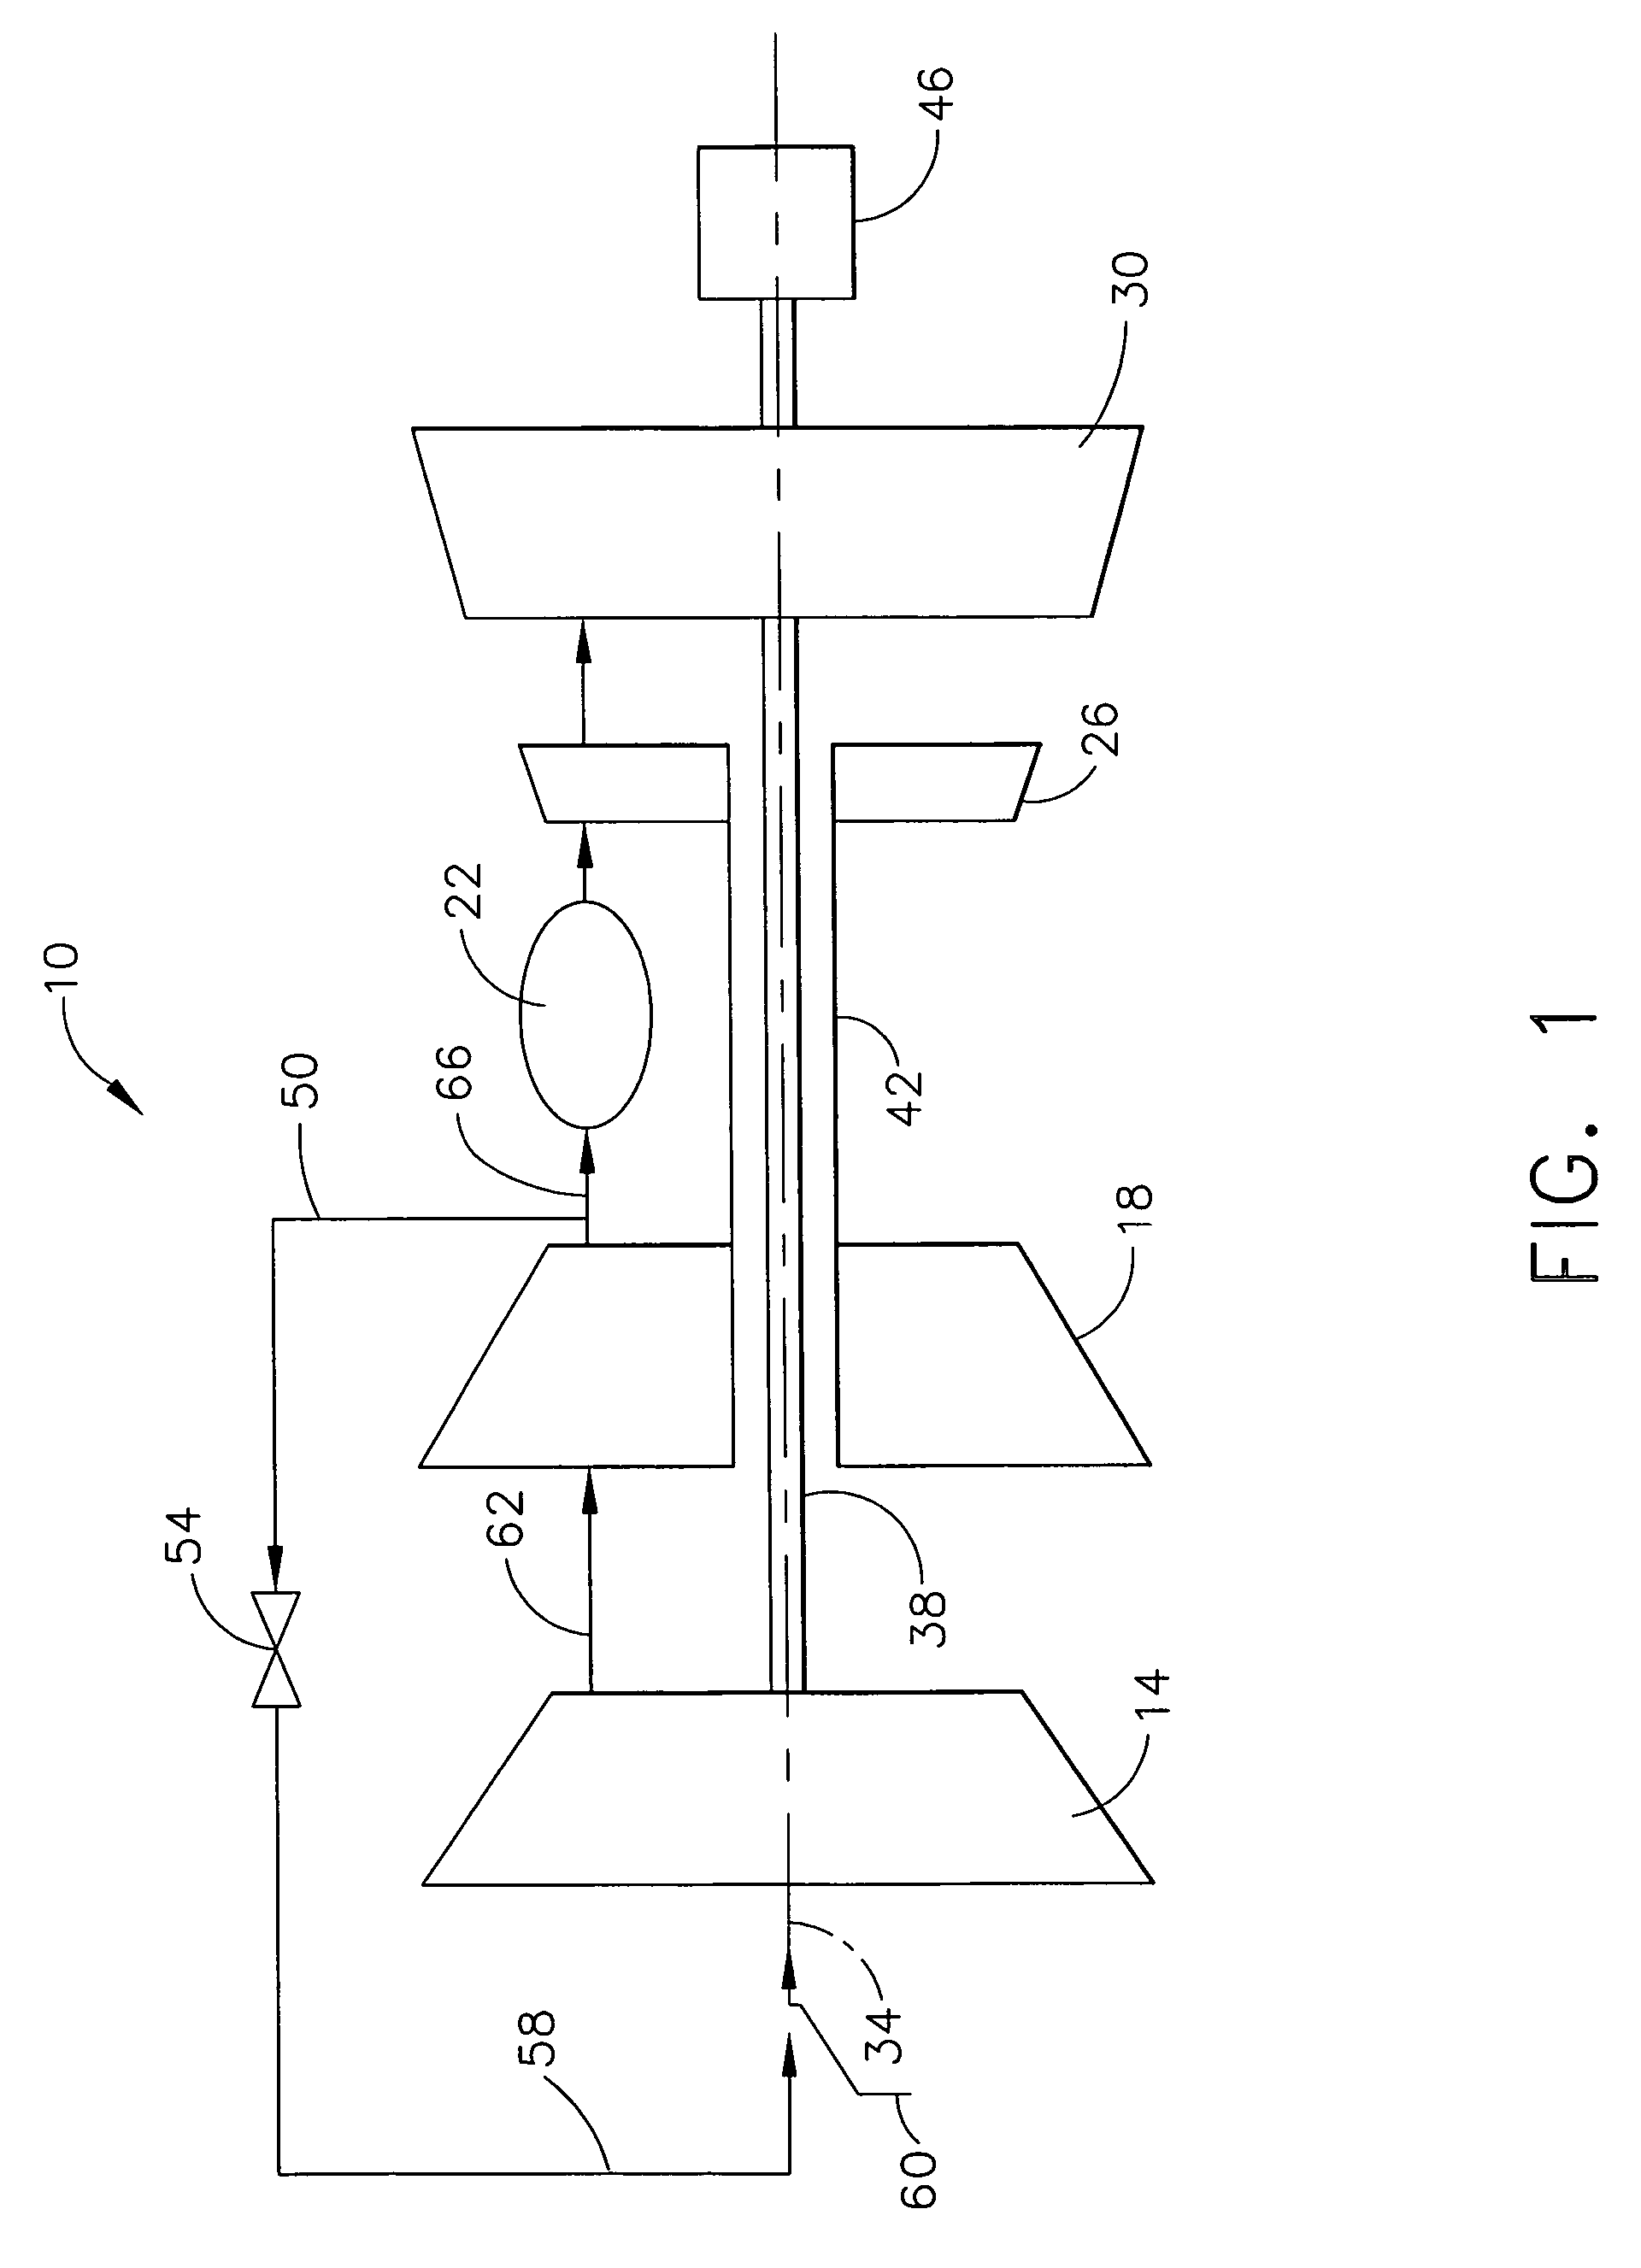 System and method for improving thermal efficiency of dry low emissions combustor assemblies